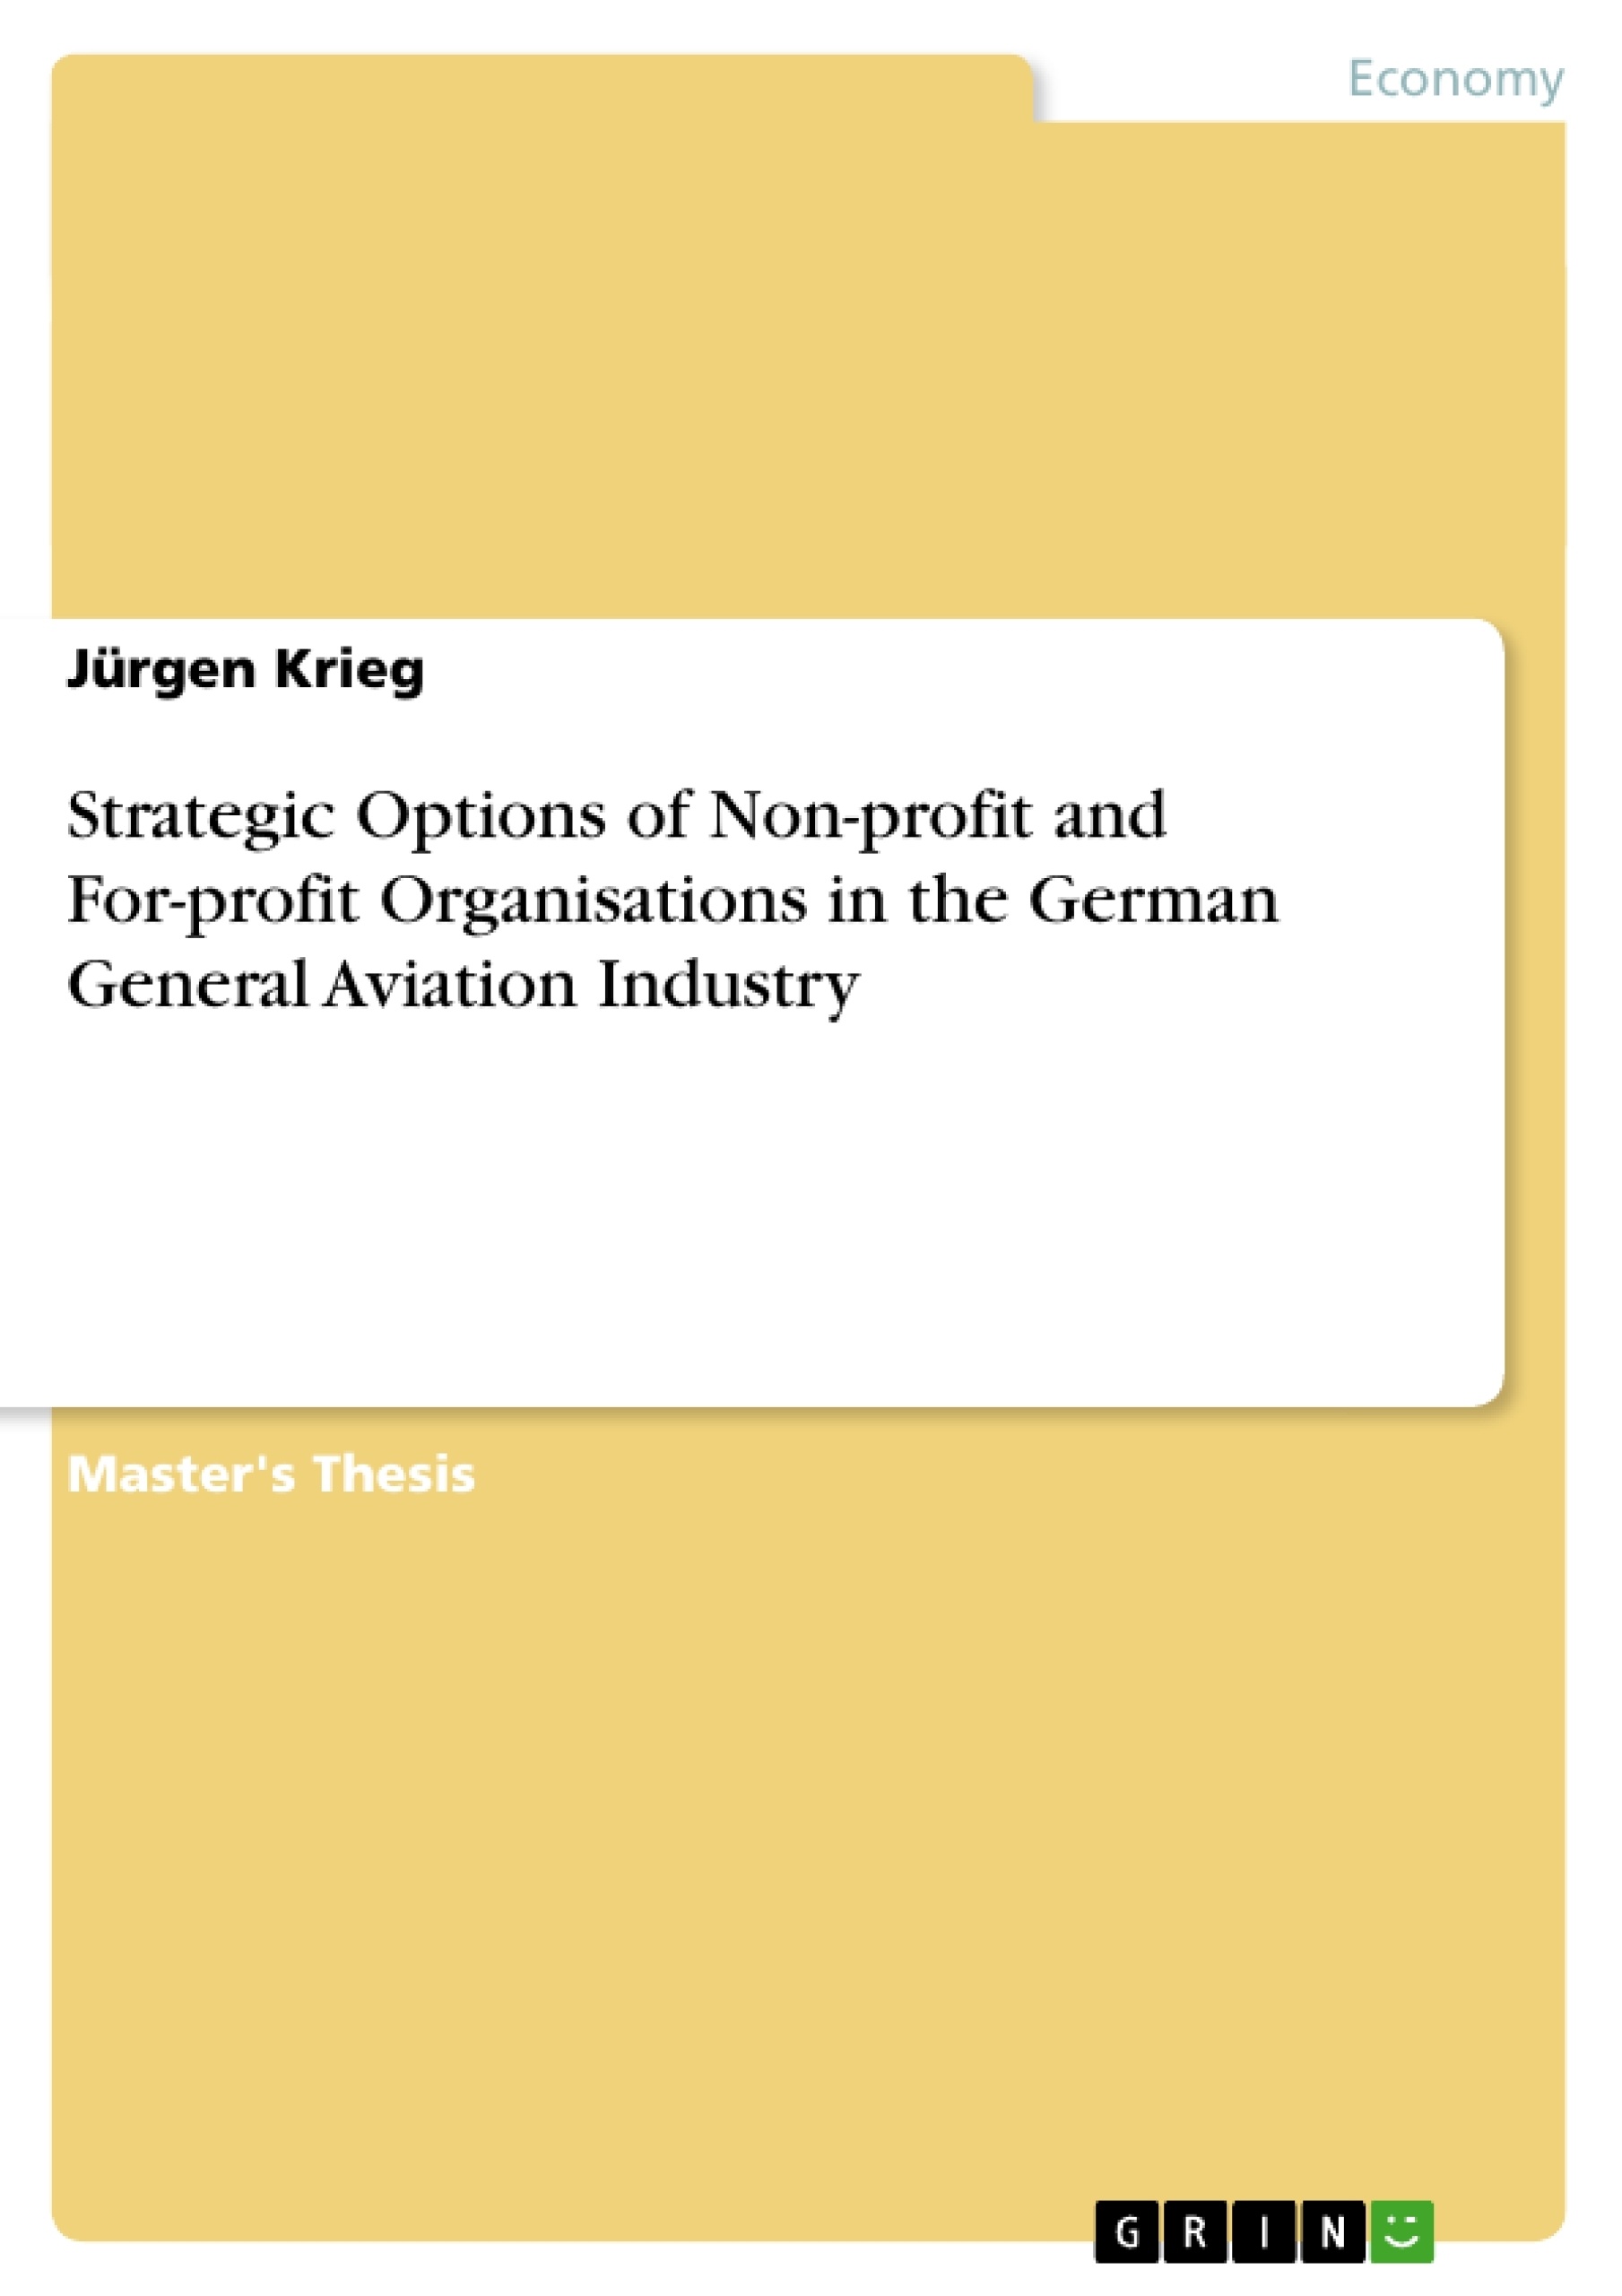 Title: Strategic Options of Non-profit and For-profit Organisations in the German General Aviation Industry